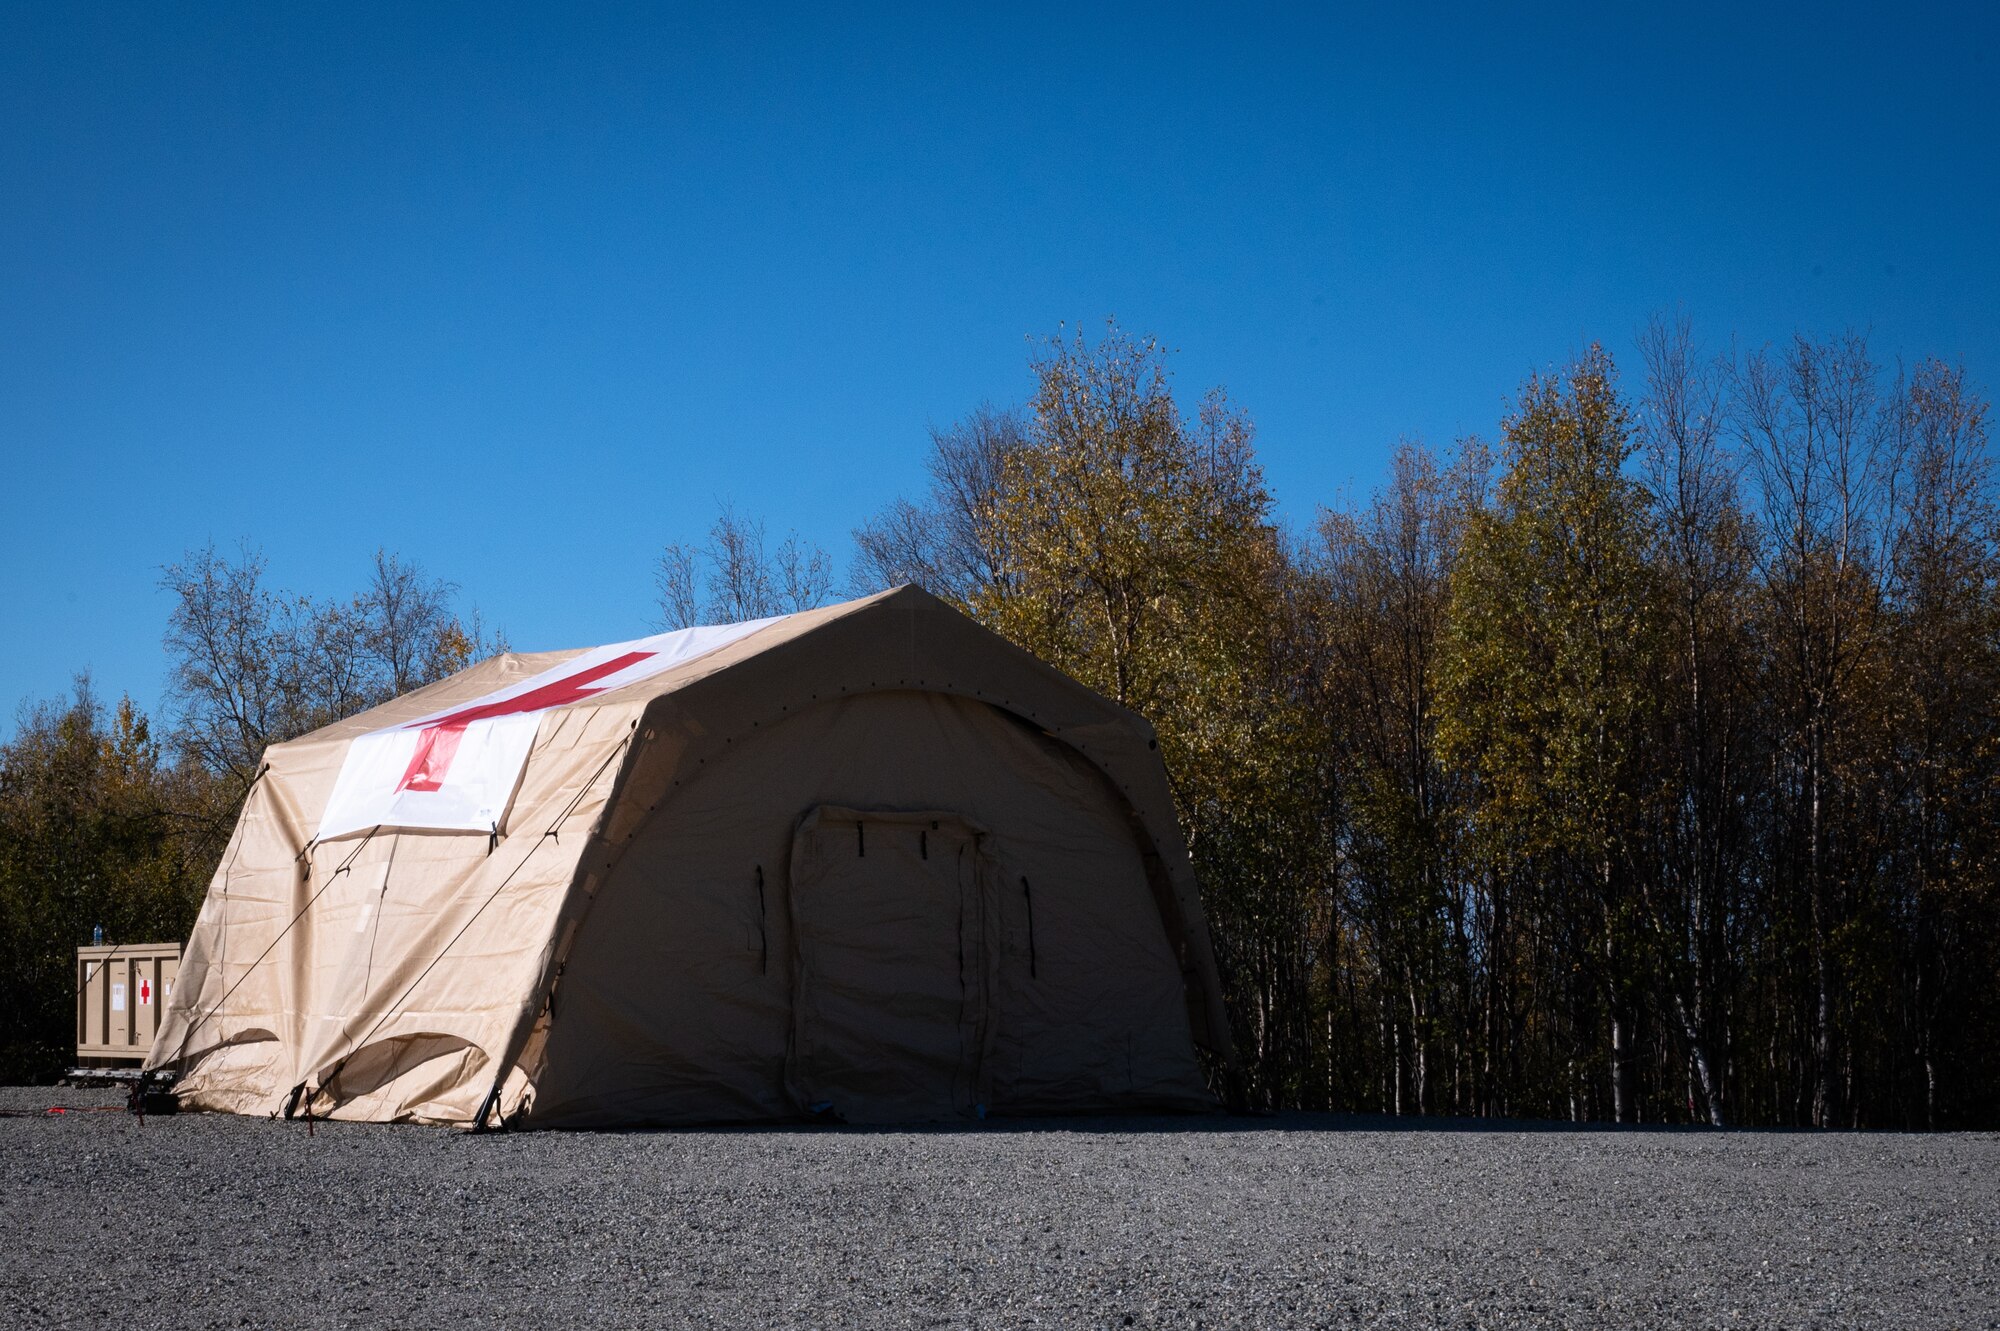 An Air Transportable Clinic (ATC) is set up at the Yukon Training Area during a Capabilities-Based Assessment, Sept. 14, 2021.